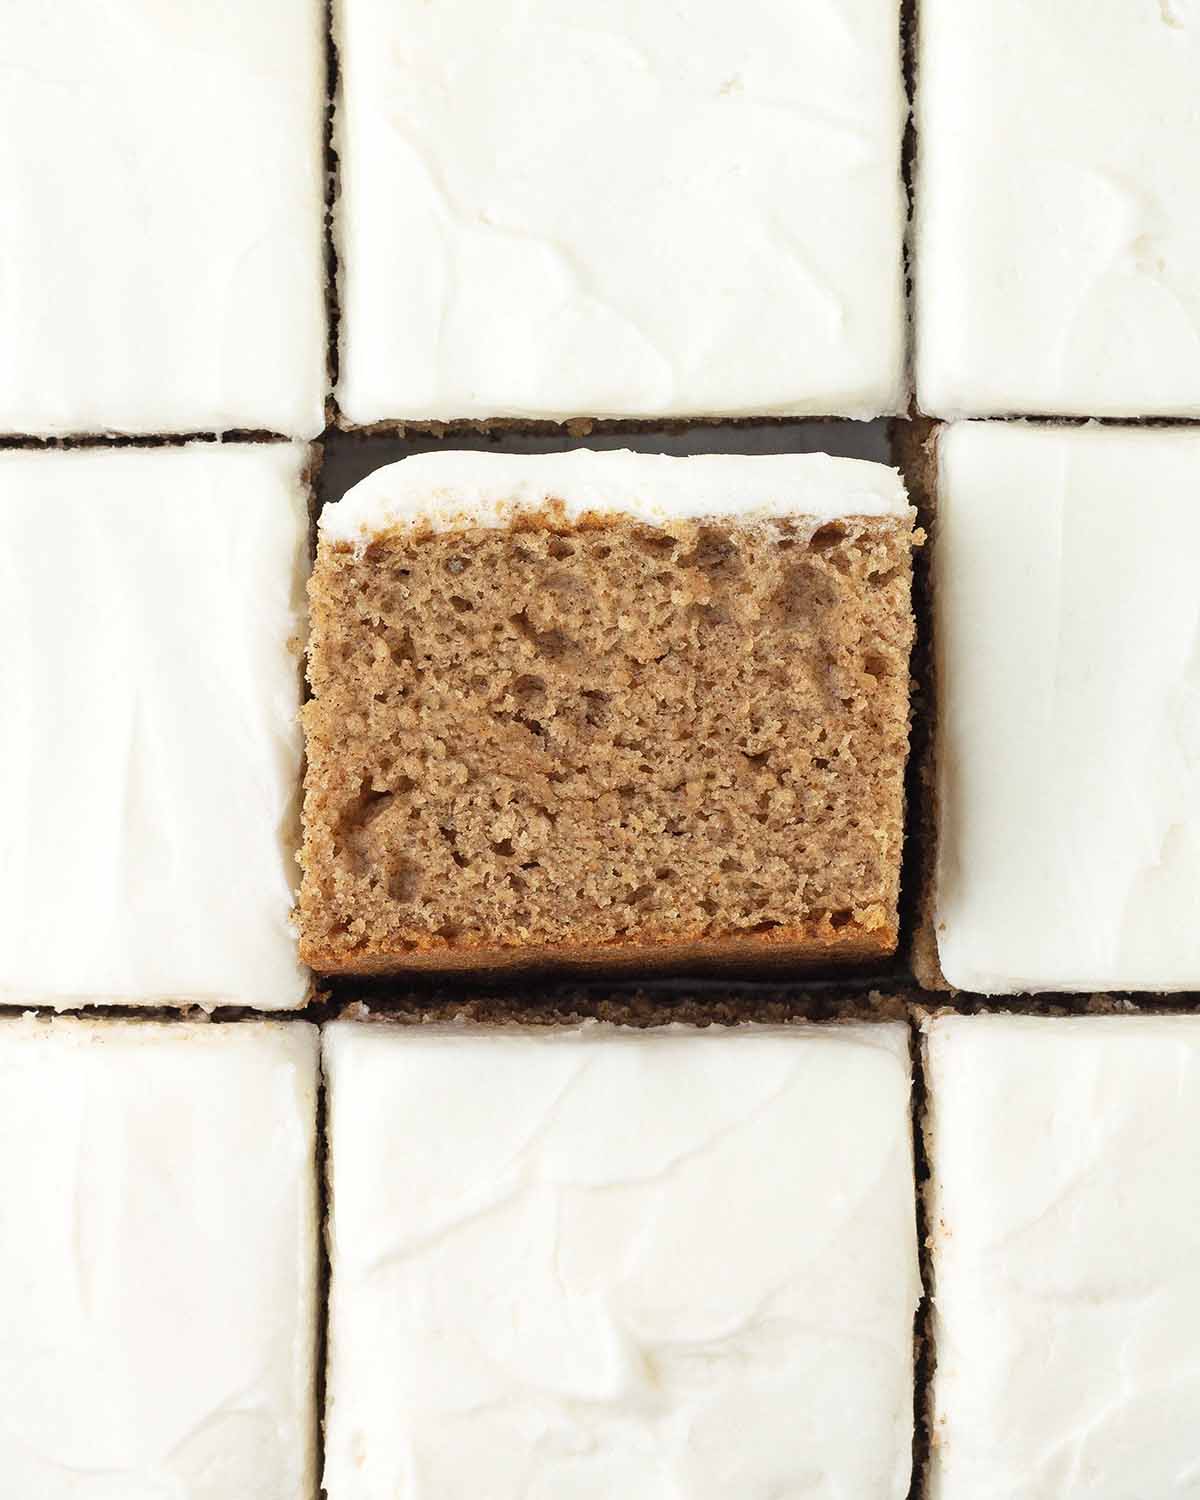 An overhead image of frosted and sliced pumpkin bars, the bar in the middle is turned on its side to show the fluffy texture.